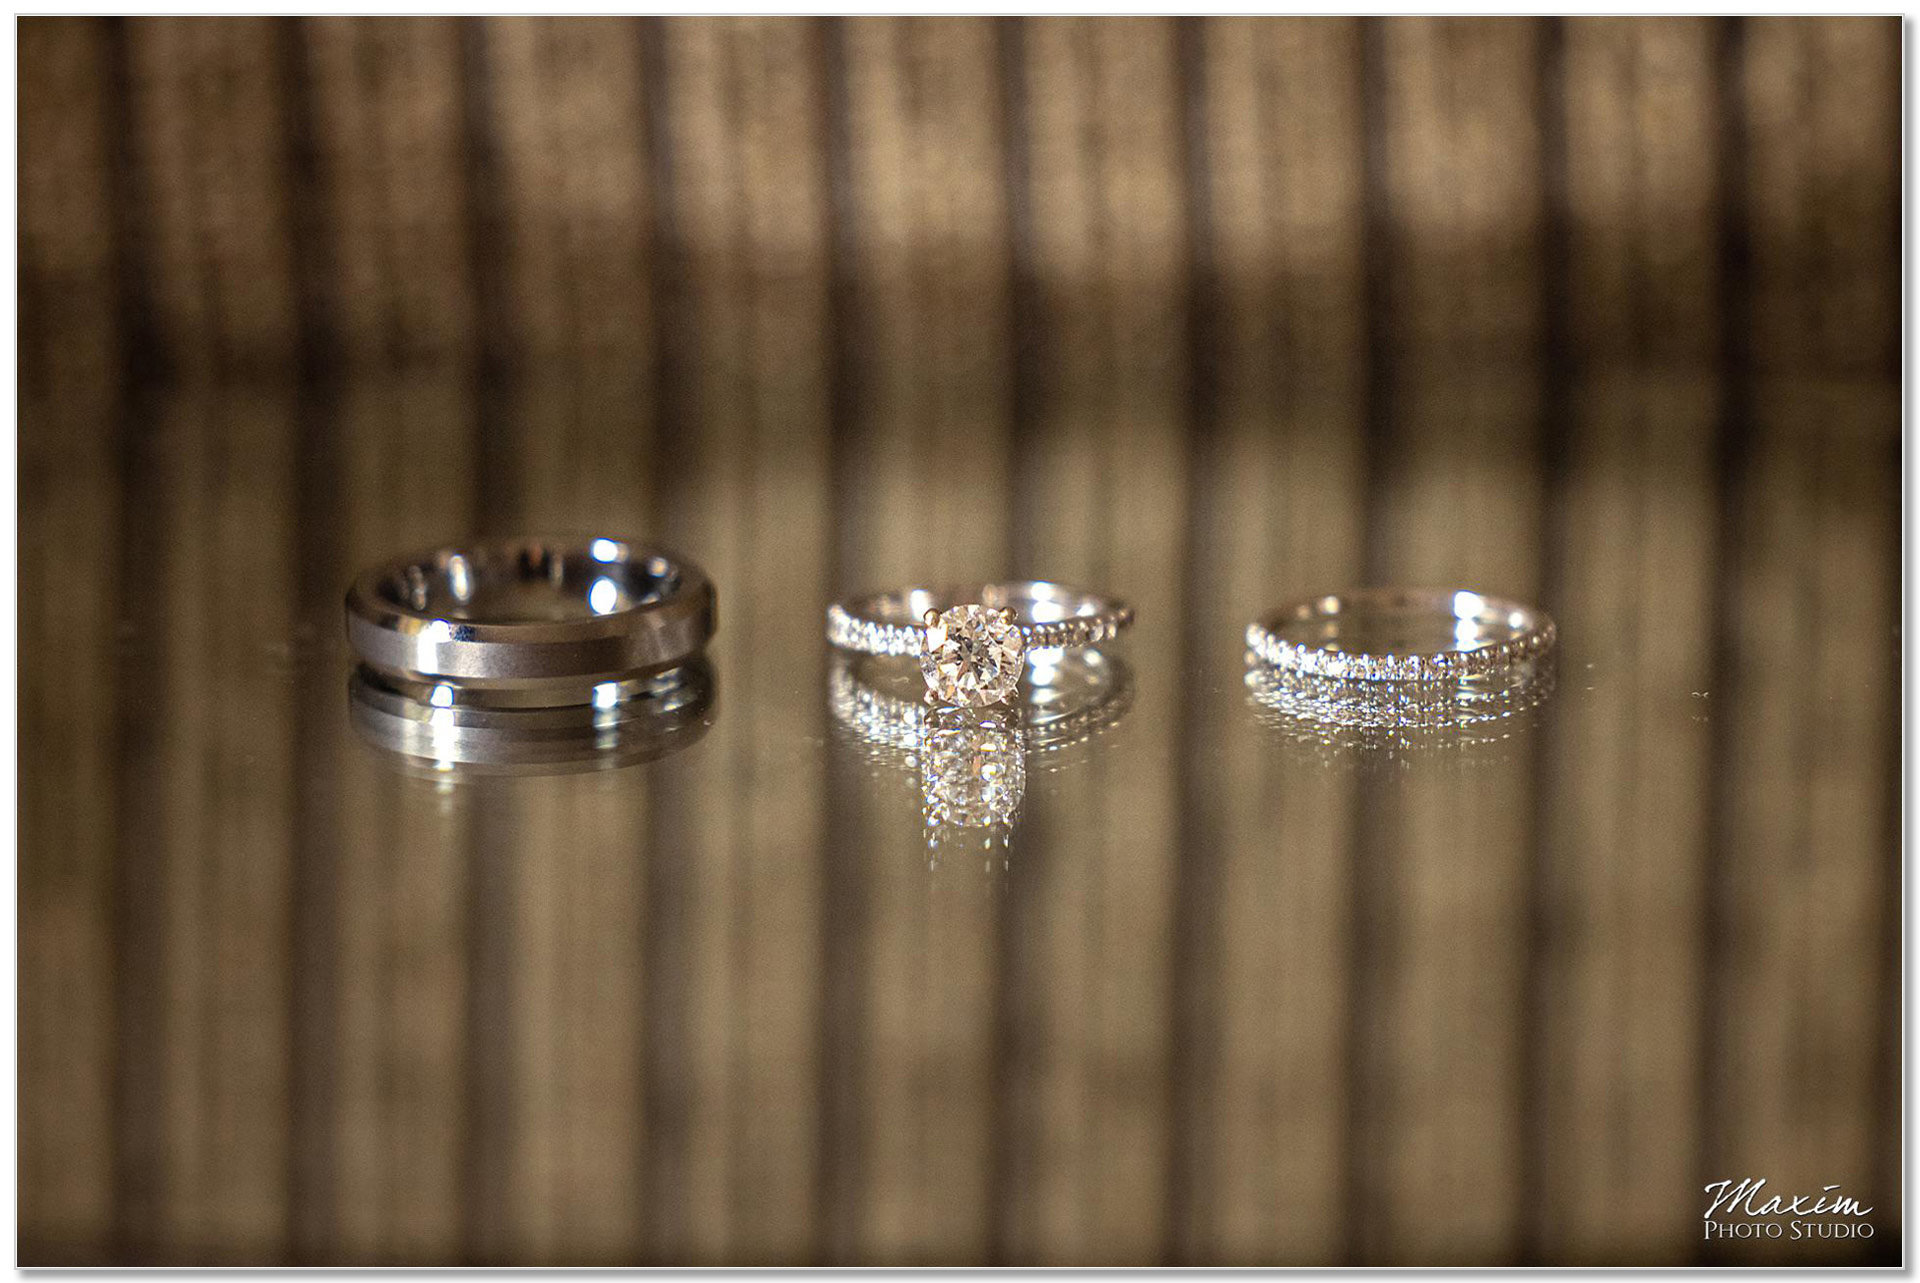 Backstage Event Center wedding rings